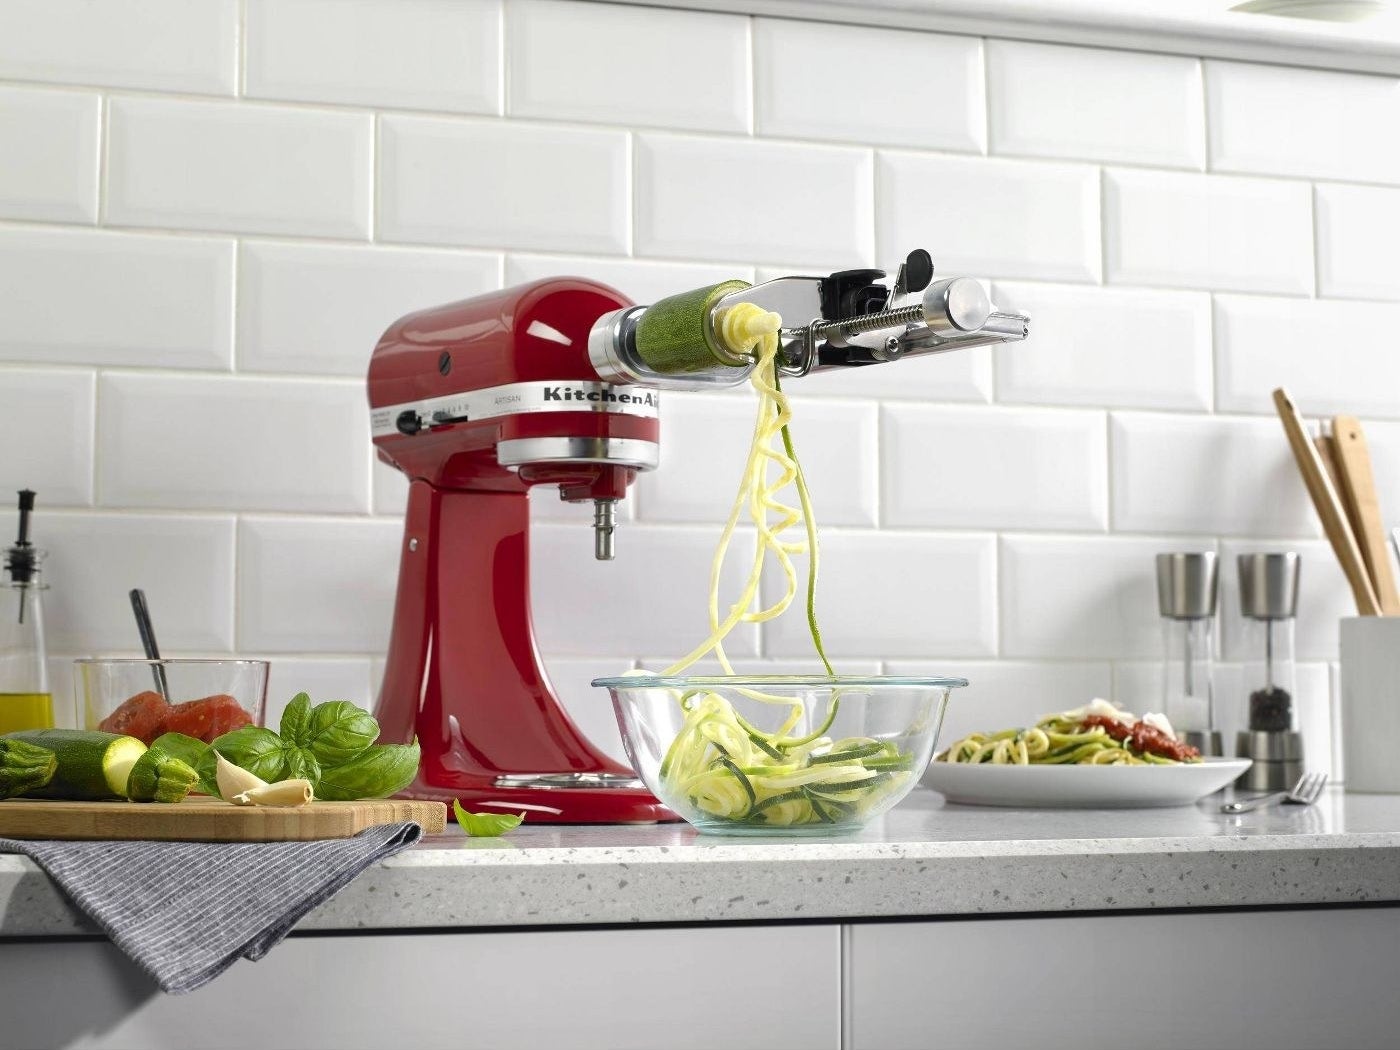 a red kitchen aid mixer with the stainless steel attachment making zucchini noodles